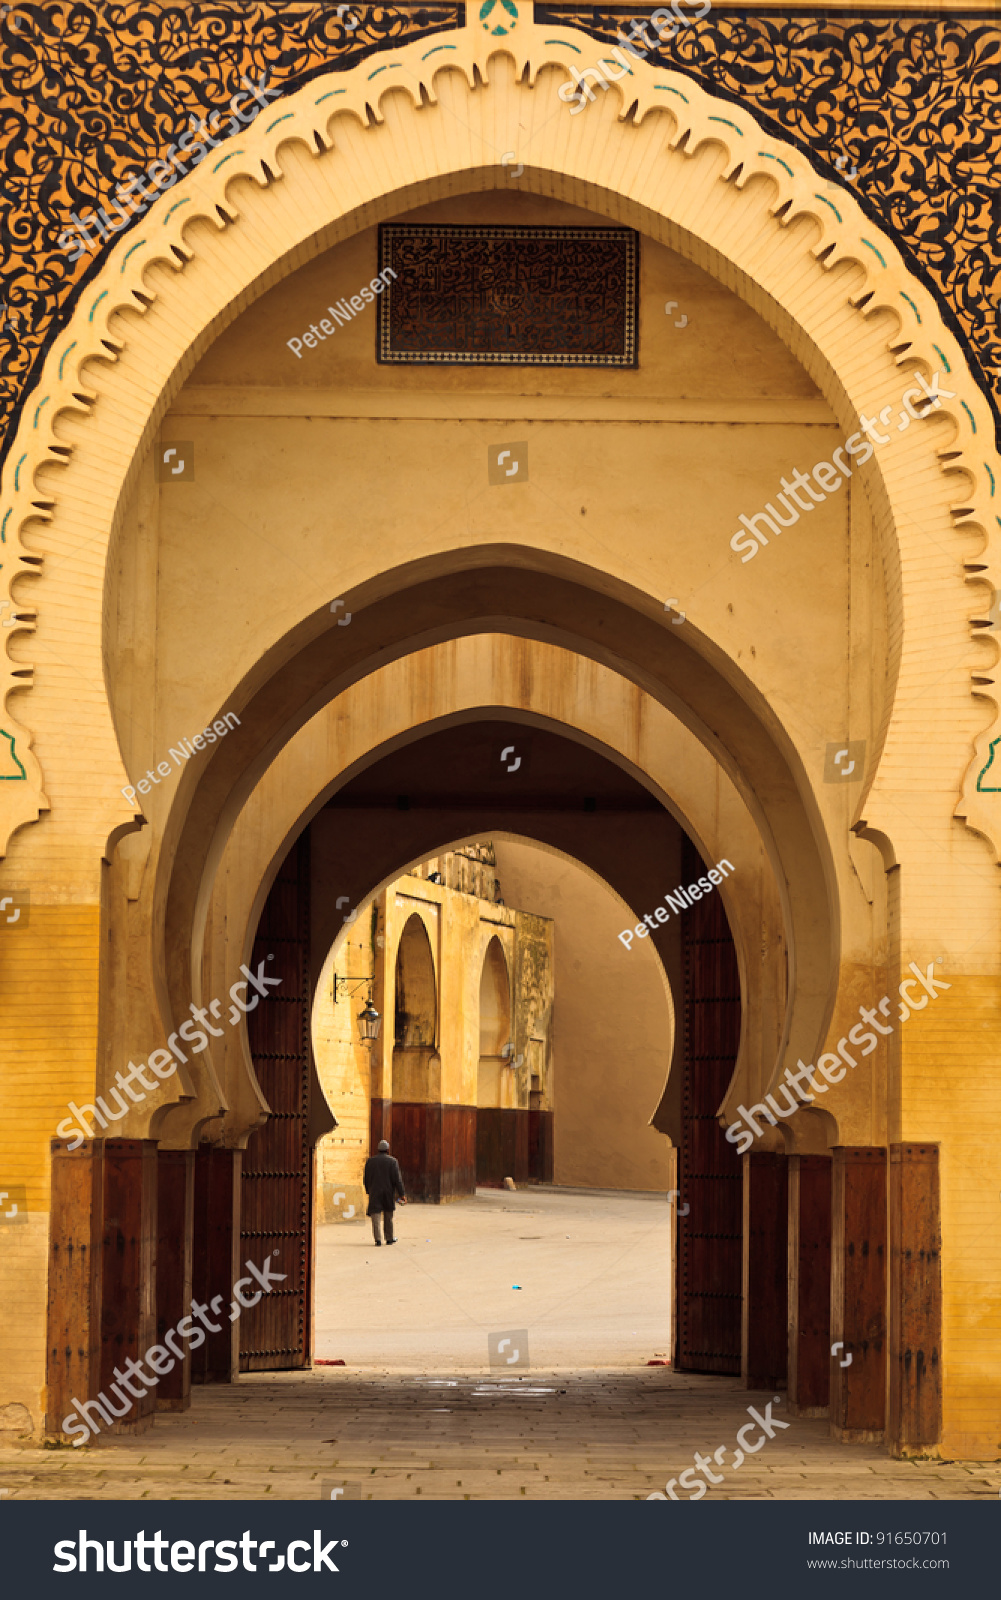 Series of intricate, ornate Moorish style curving arches of passageway into mosque courtyard in Fez, Morocco #91650701